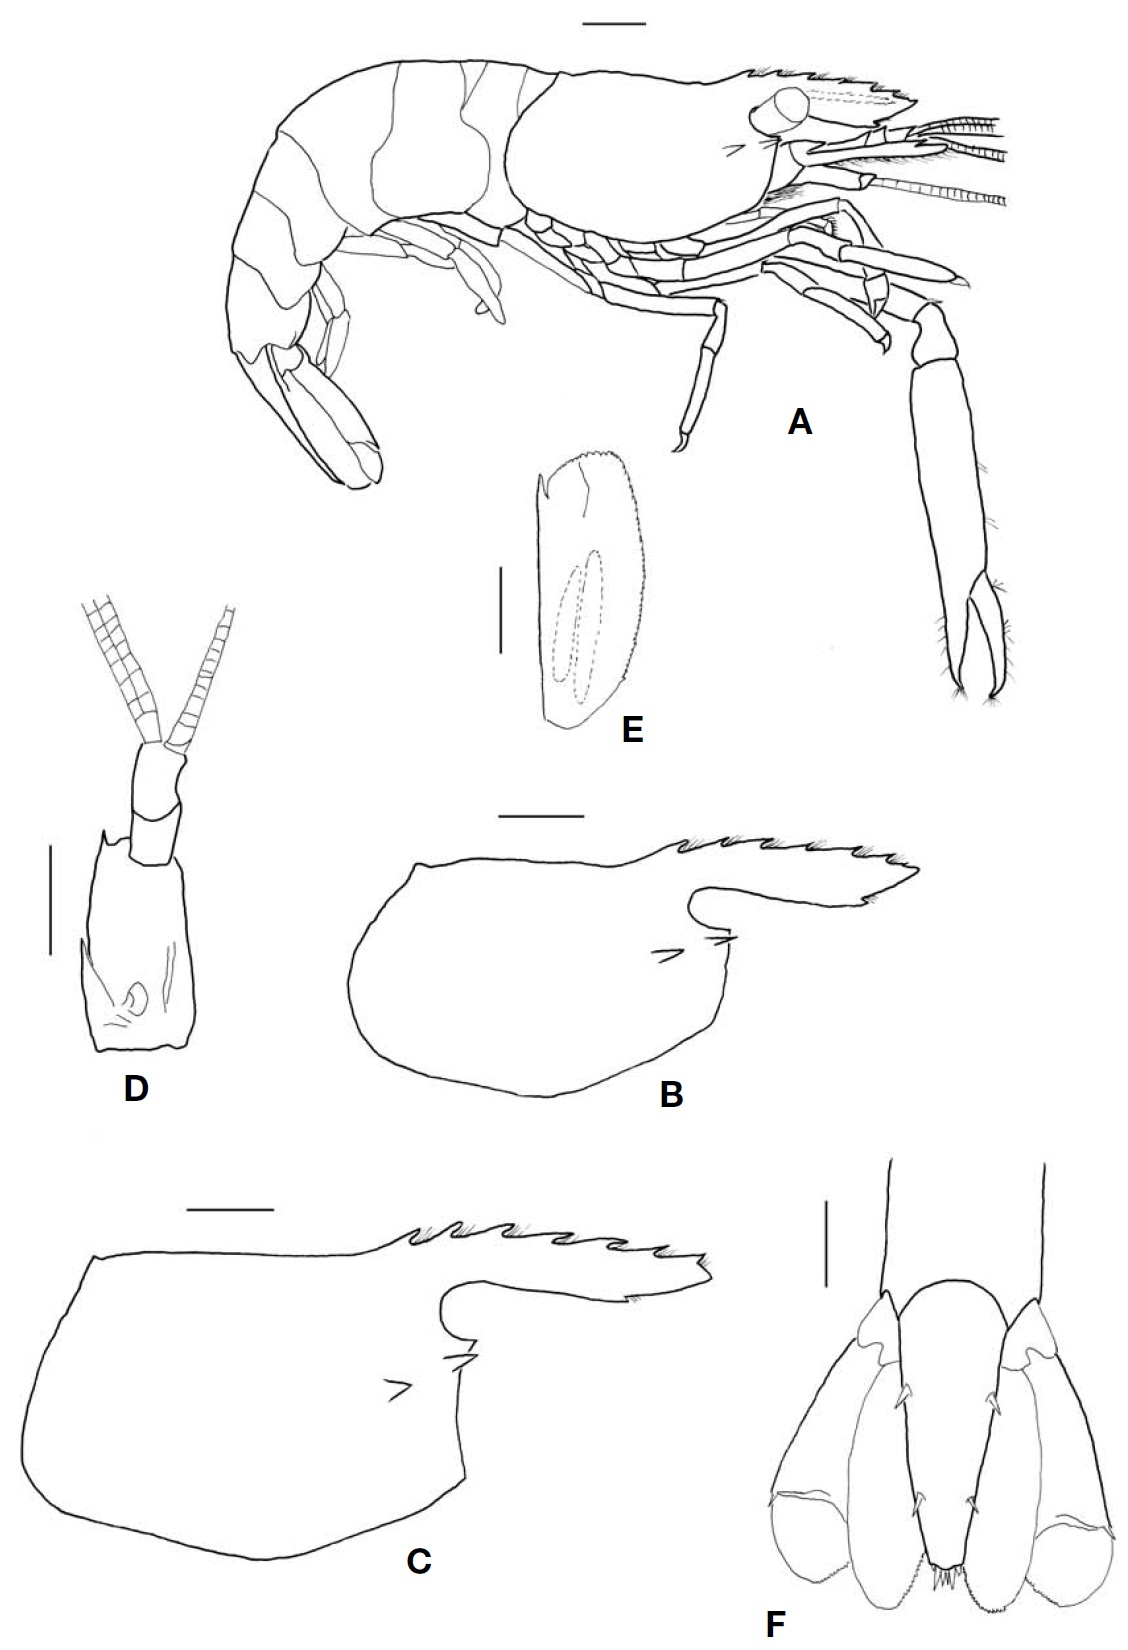 Periclimenes ornatus male (postorbital carapace length 4.1 mm). A Habitus lateral; B Male carapace lateral; C Female (postorbital carapace length 4.8 mm) carapace lateral; D Right antennule ventral; E Right scaphocerite dorsal; F Telson dorsal. Scale bars: A-F=1 mm.